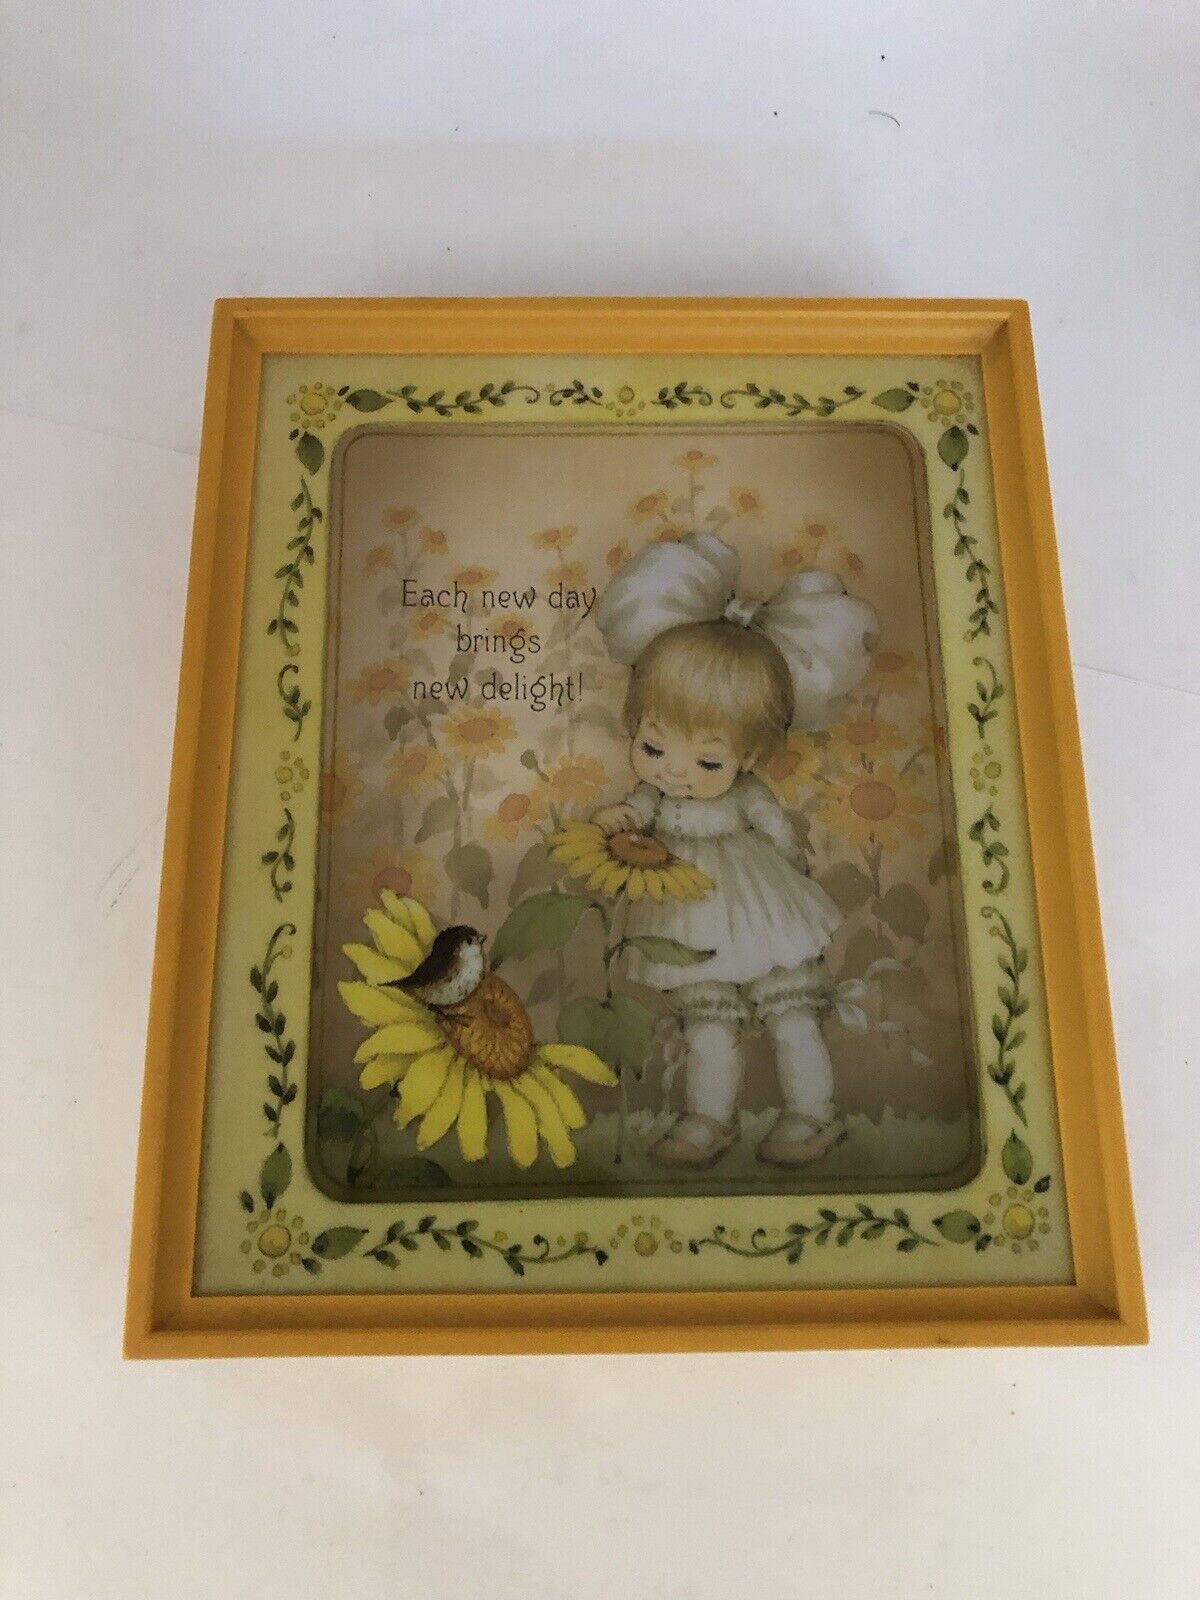 Vintage Hallmark 3D scene setters wall art 5.5 inch by 4.5 inch approximately 